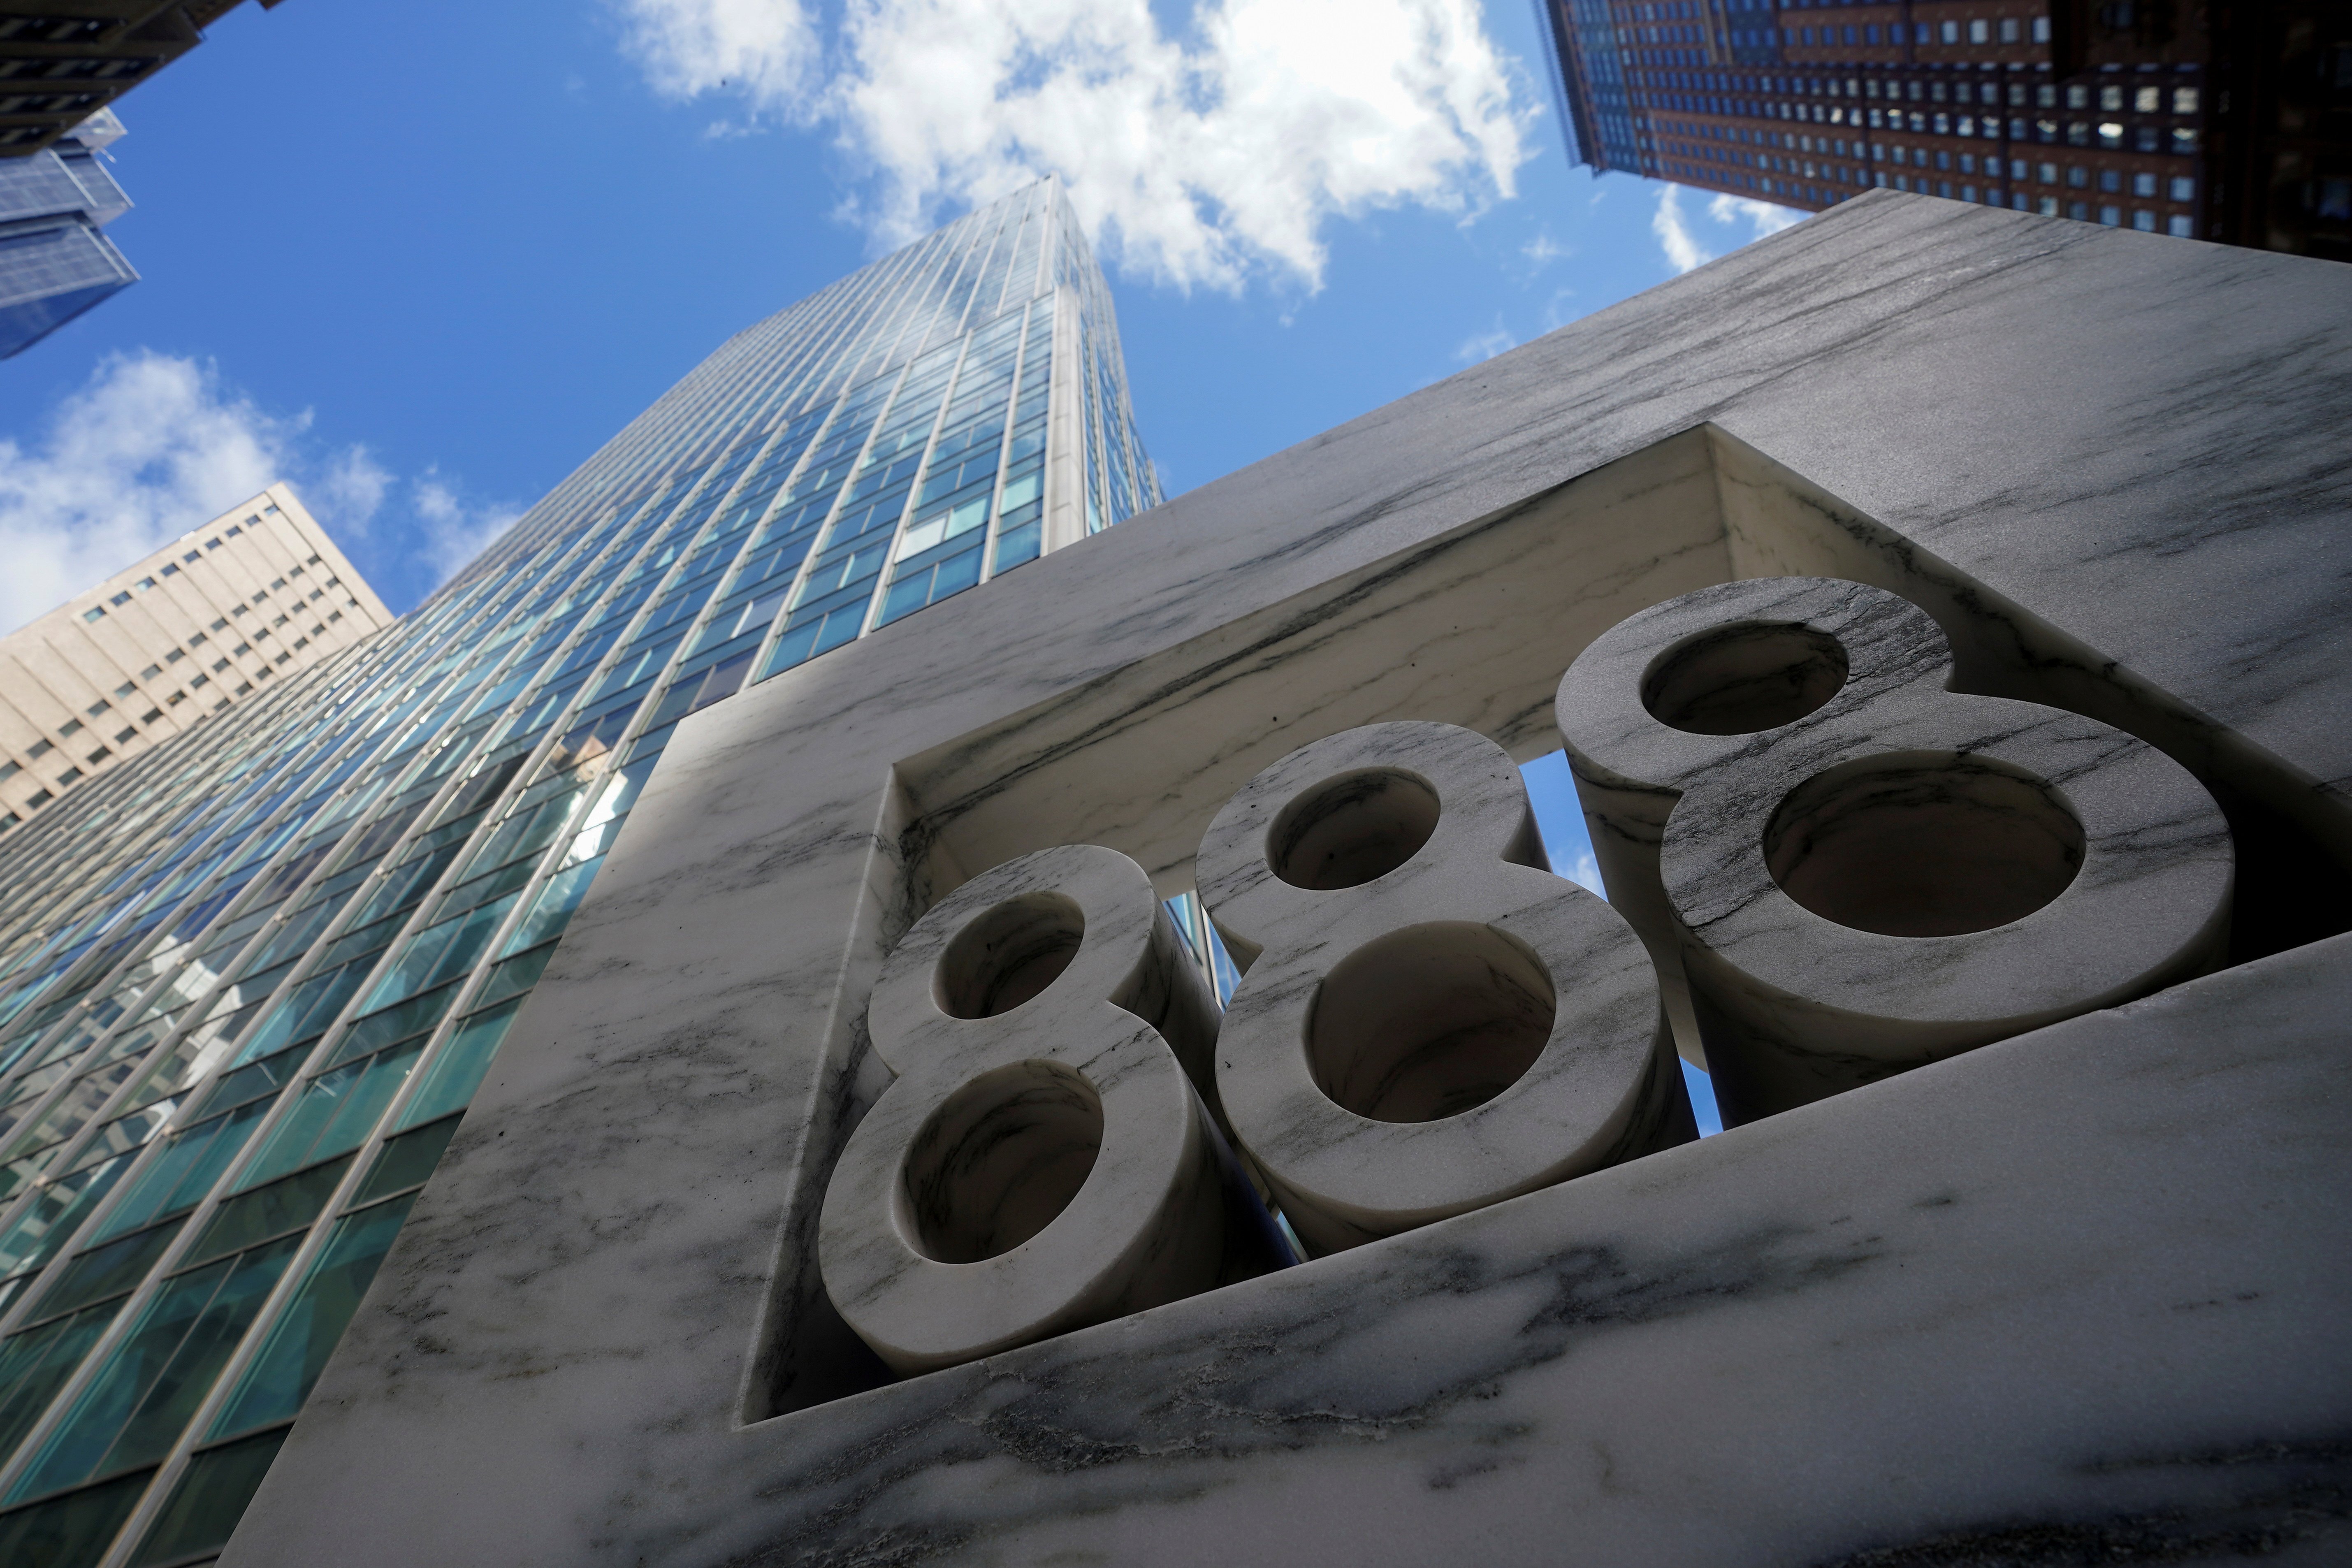 Archegos Capital is reportedly housed in this 888 7th Ave building in New York, seen on March 29. Photo: Reuters